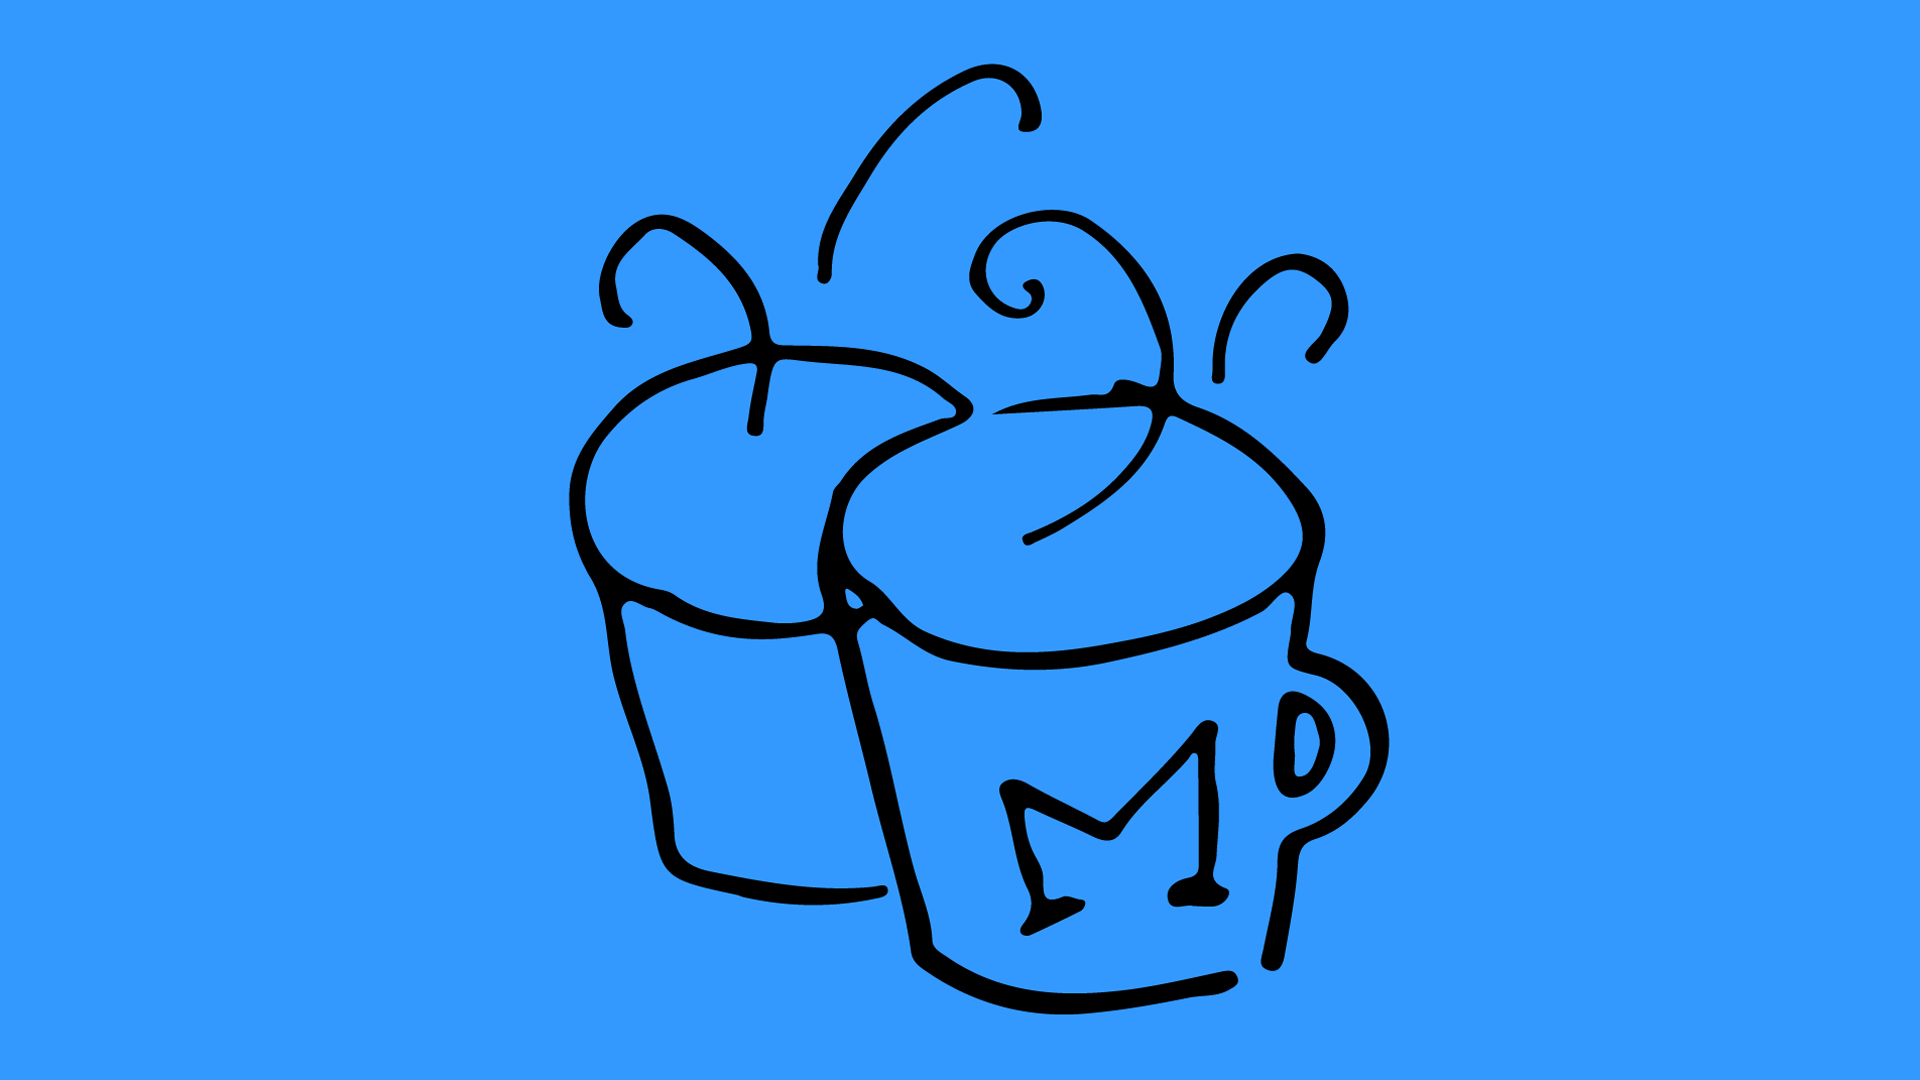 Illustration of coffee mugs with a blue background